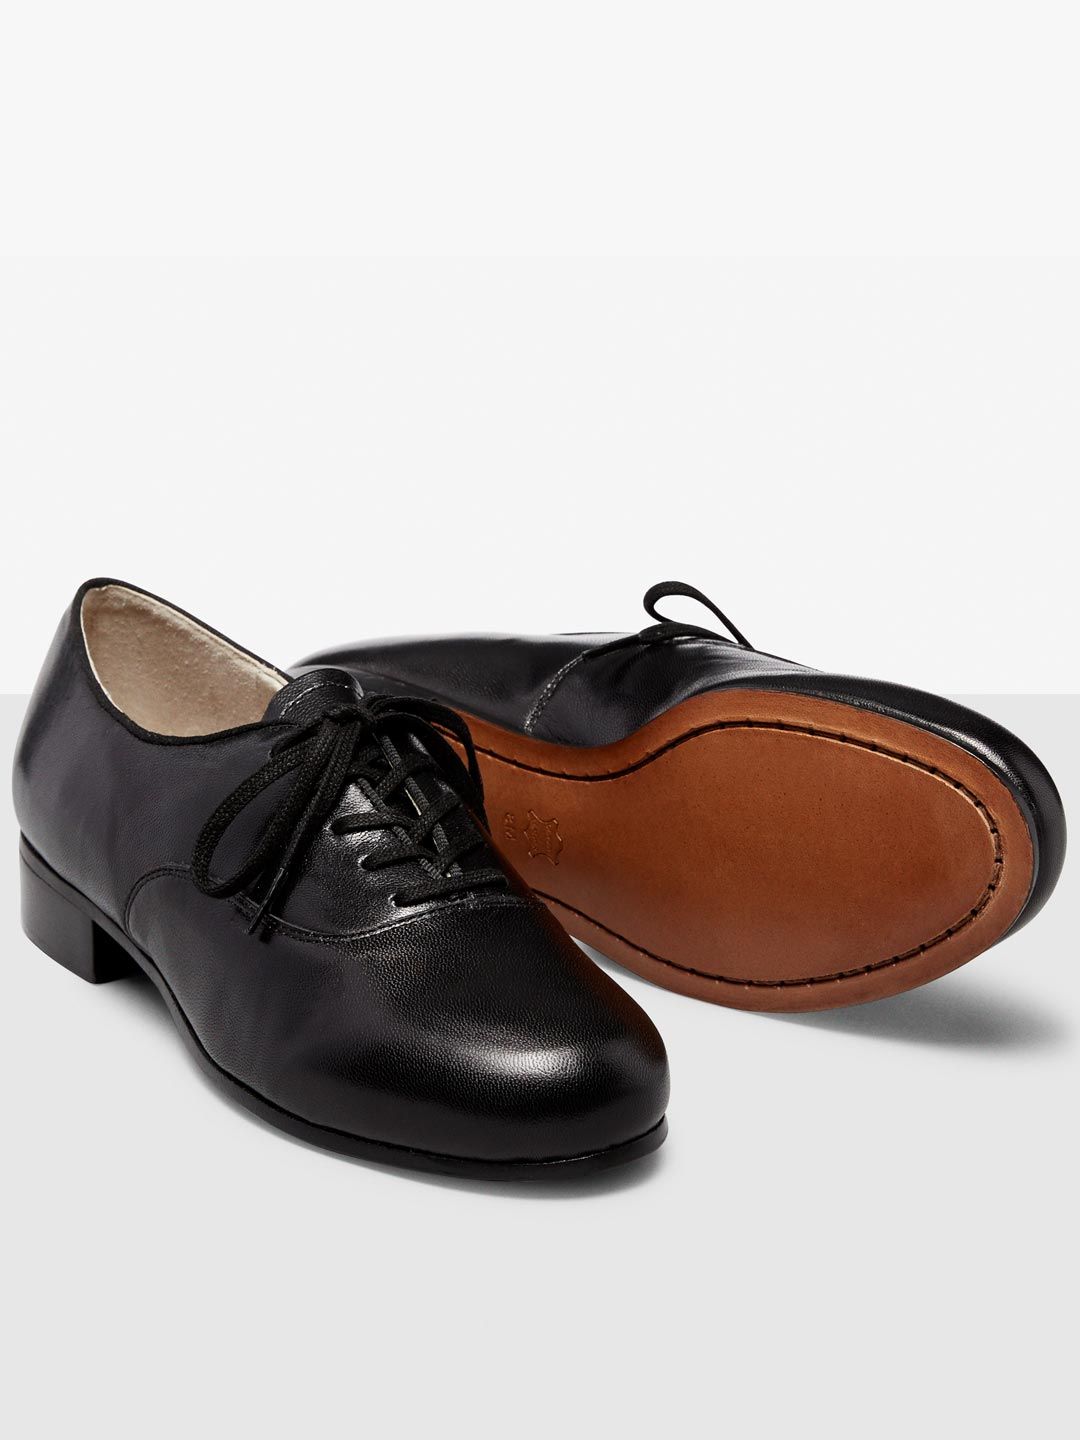 K360 (Character Oxford Shoes)